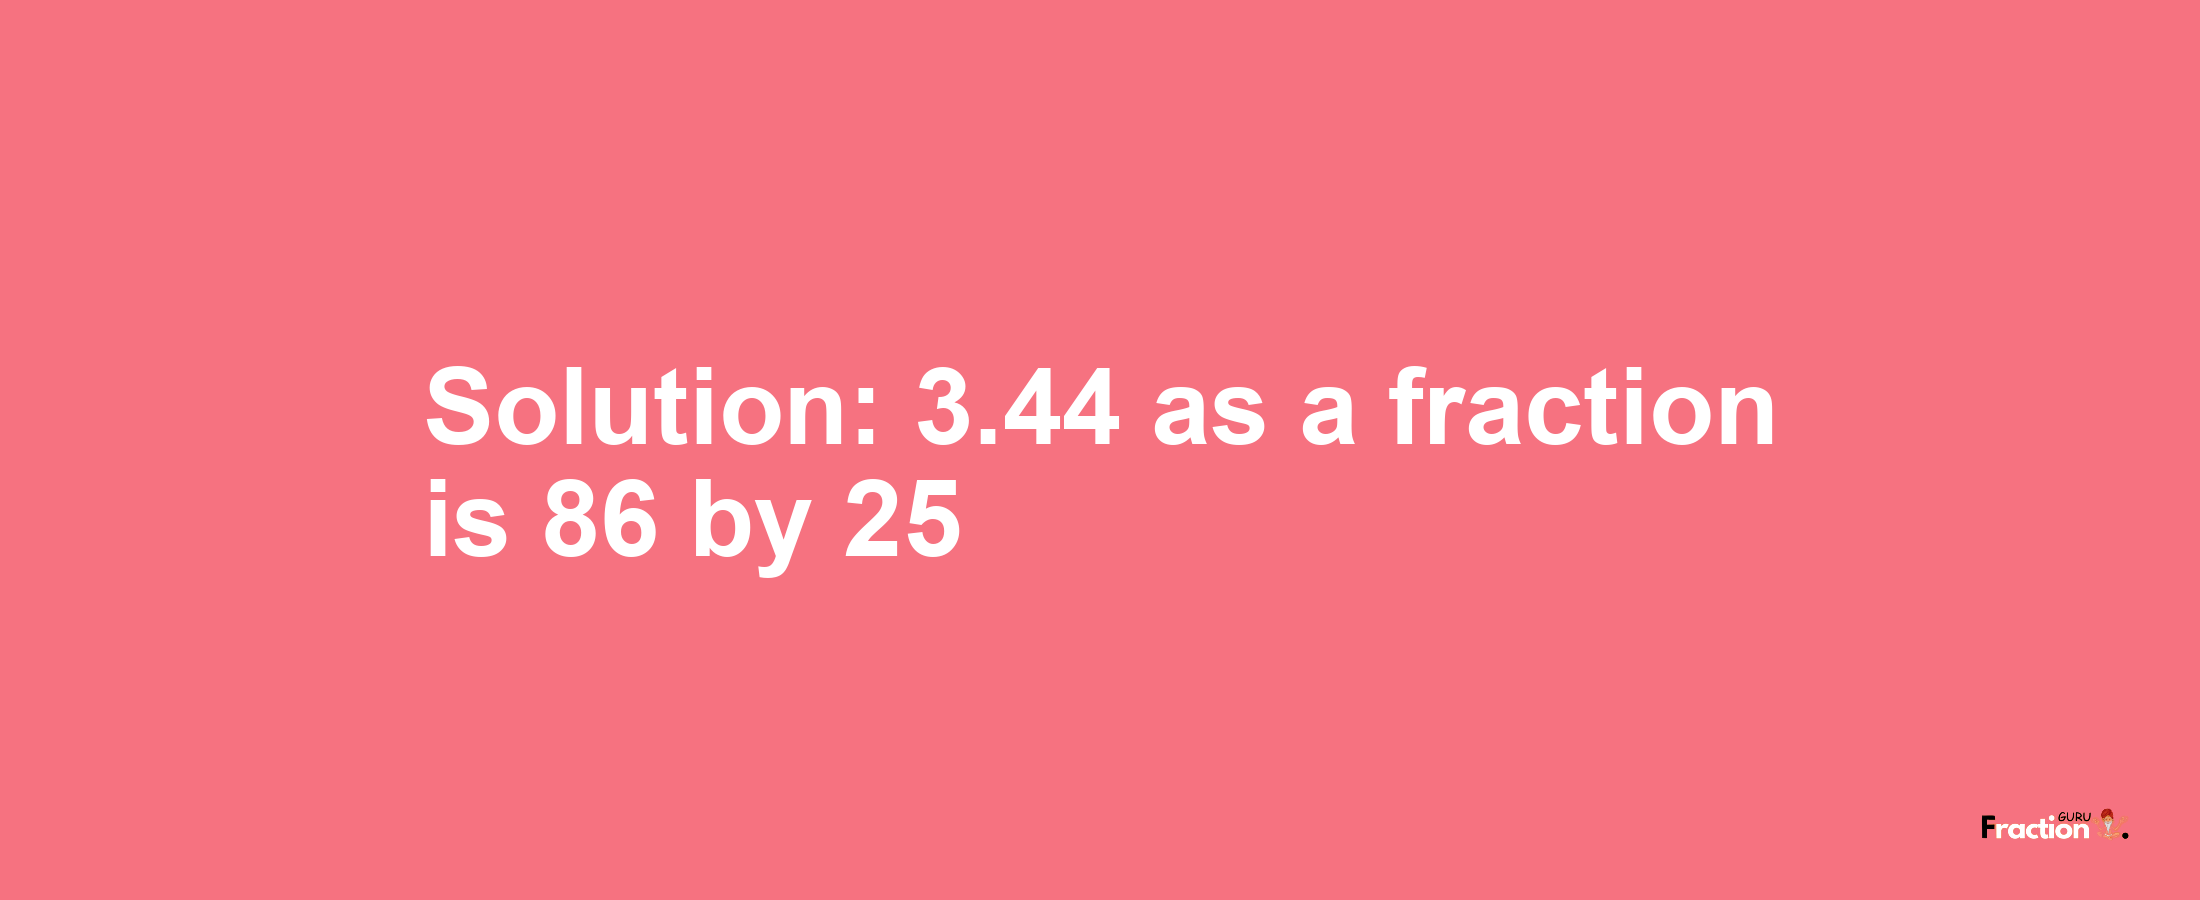 Solution:3.44 as a fraction is 86/25